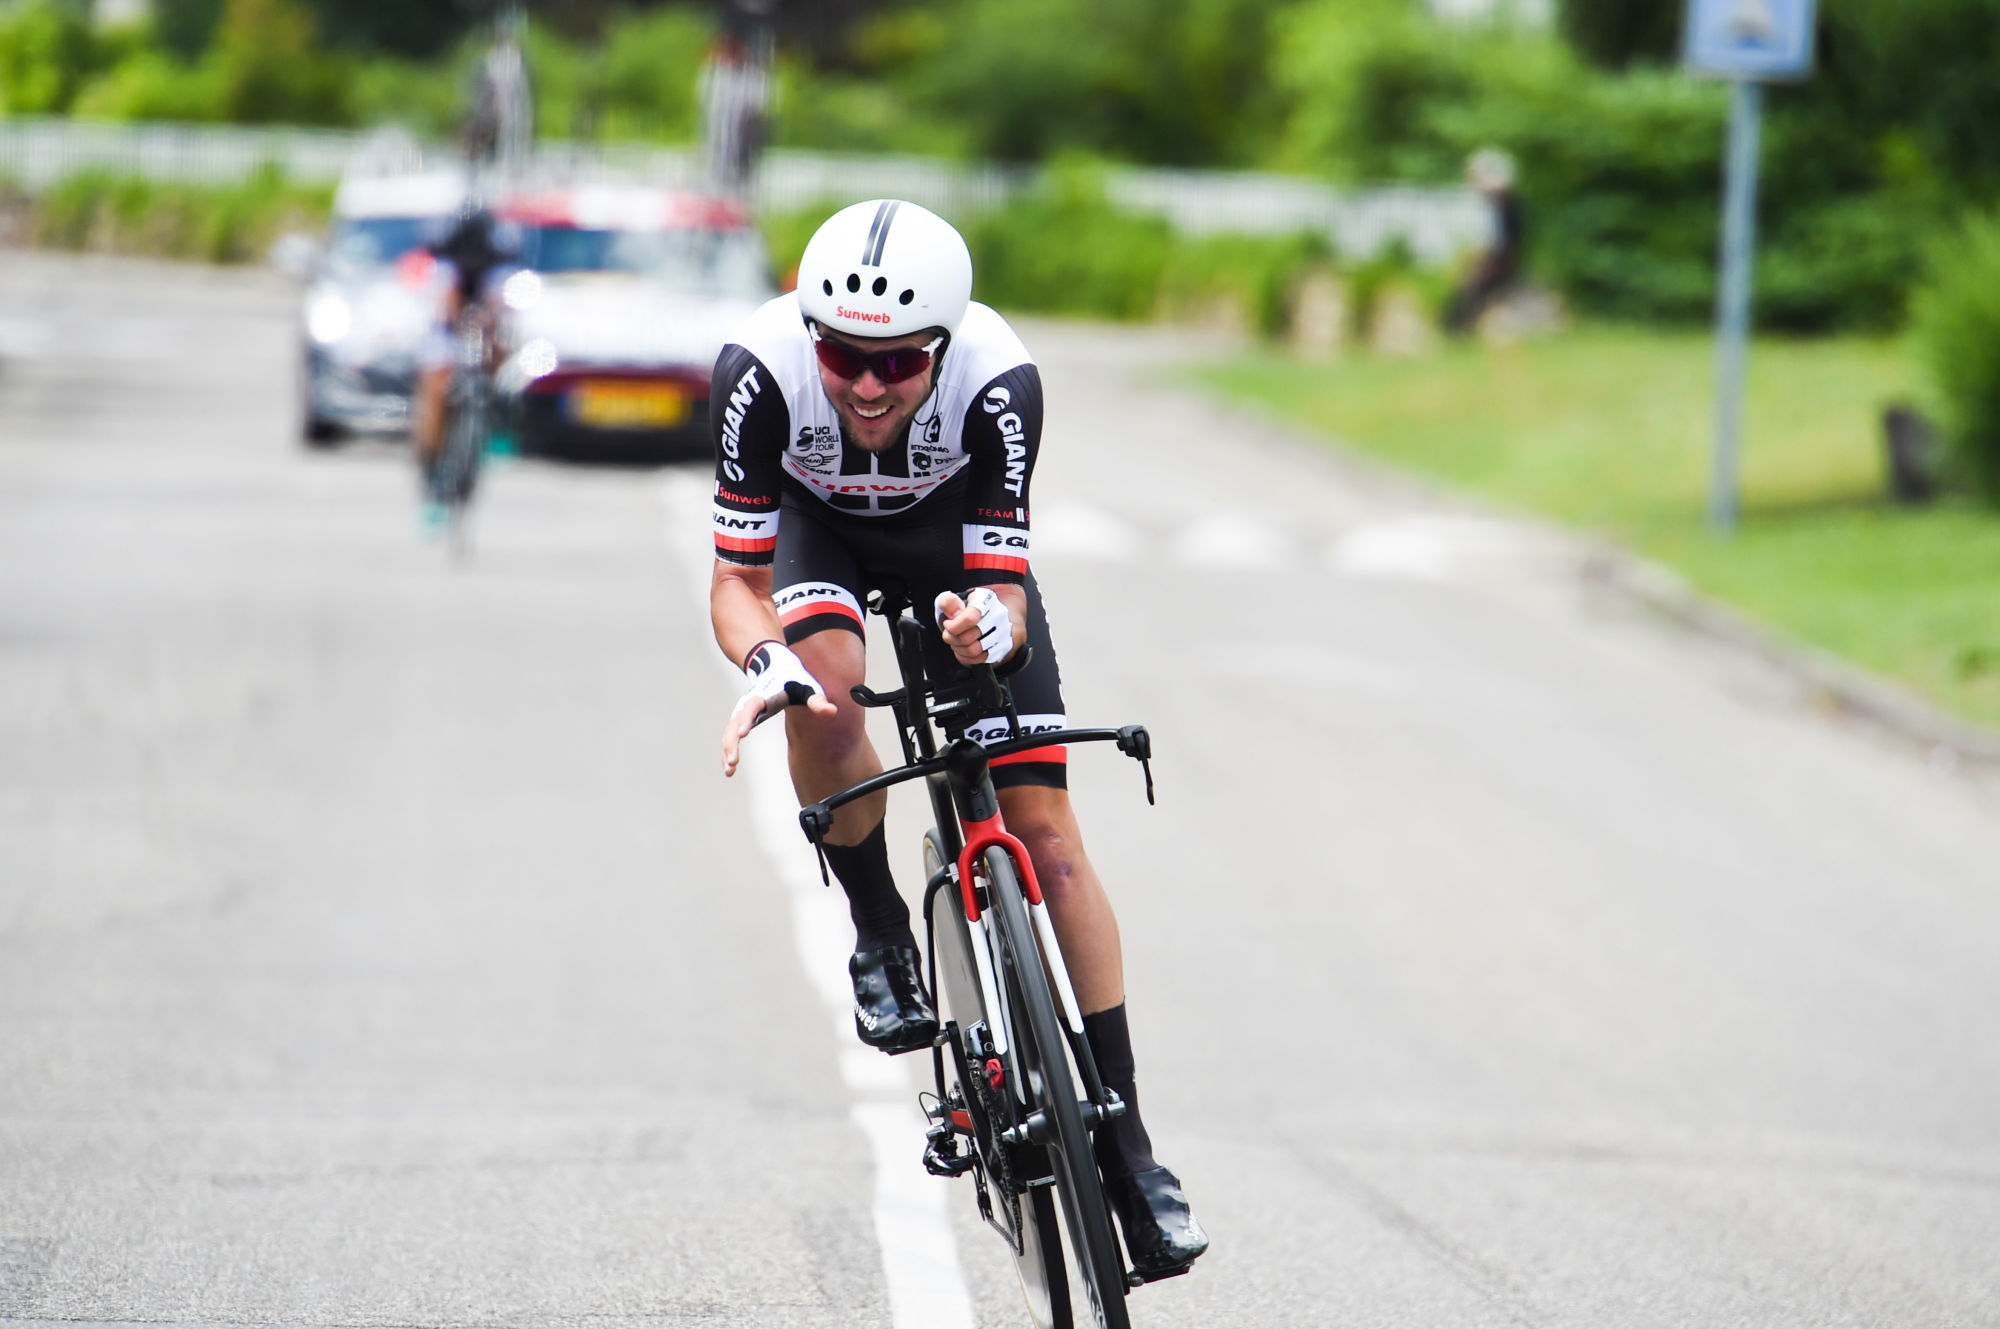 Chris Hamilton of Team Sunweb during the stage 04 of the criterium du Dauphine, 24,3km of time trial from La tour du pin to Bourgoin Jallieu, on june 07th 2017.
Photo: Sirotti / Icon Sport